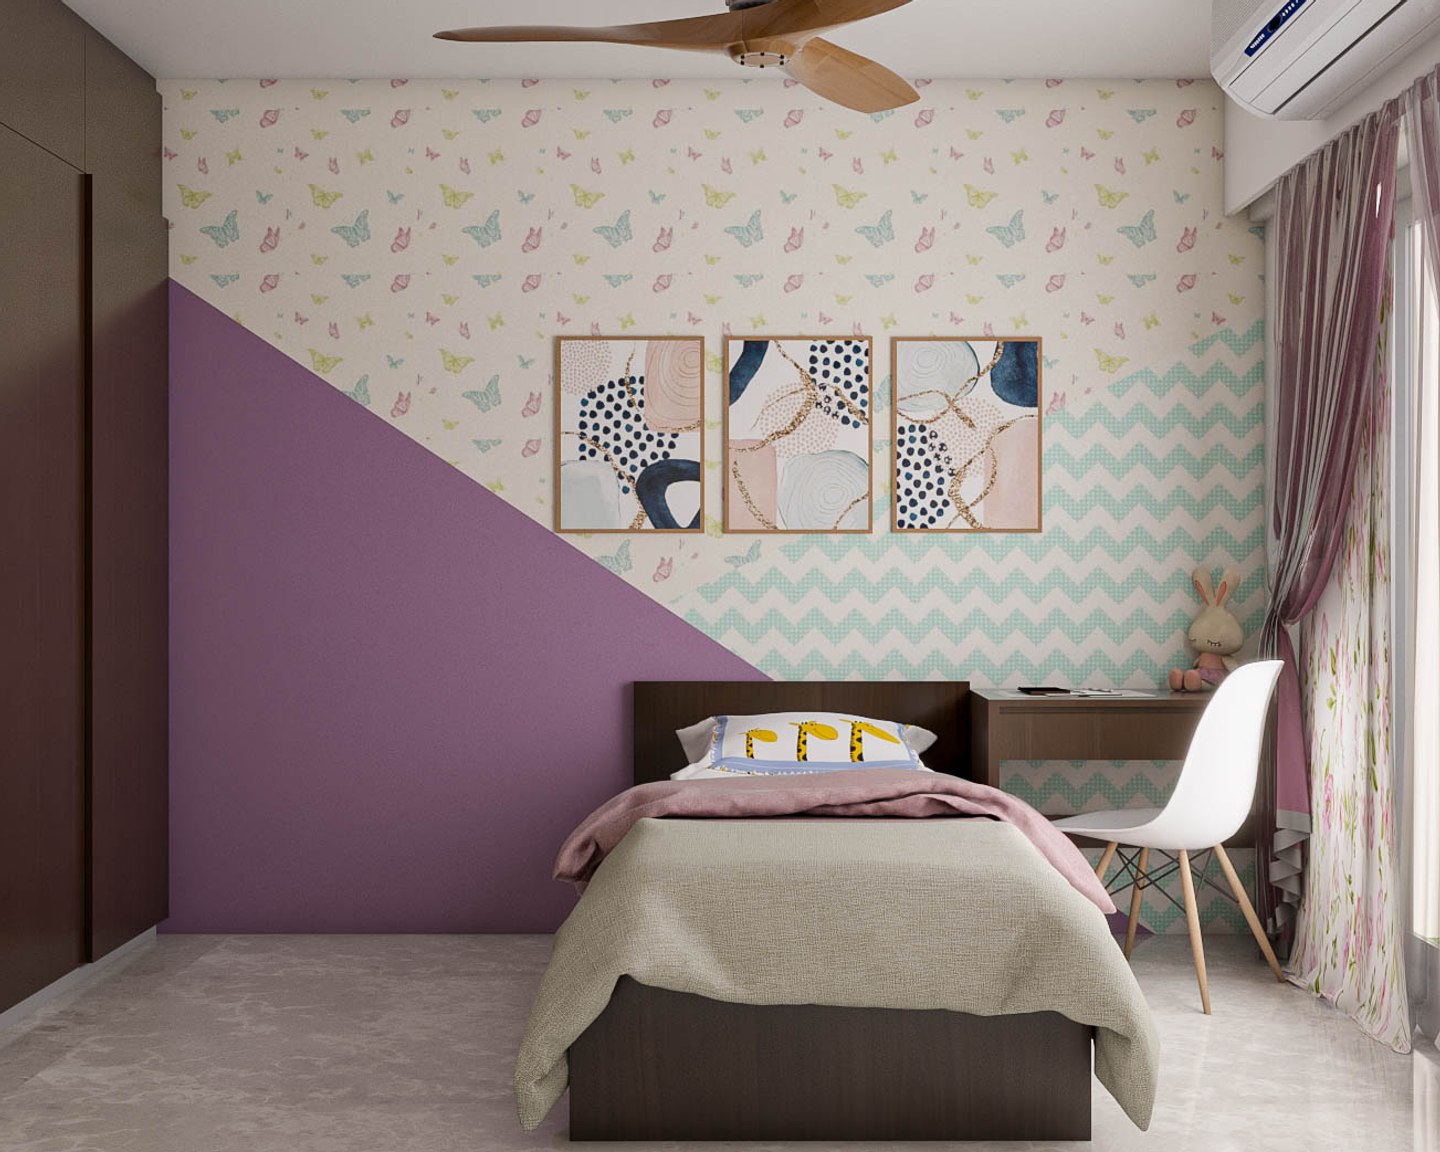 Kids Bedroom with Painting on Wall - Livspace